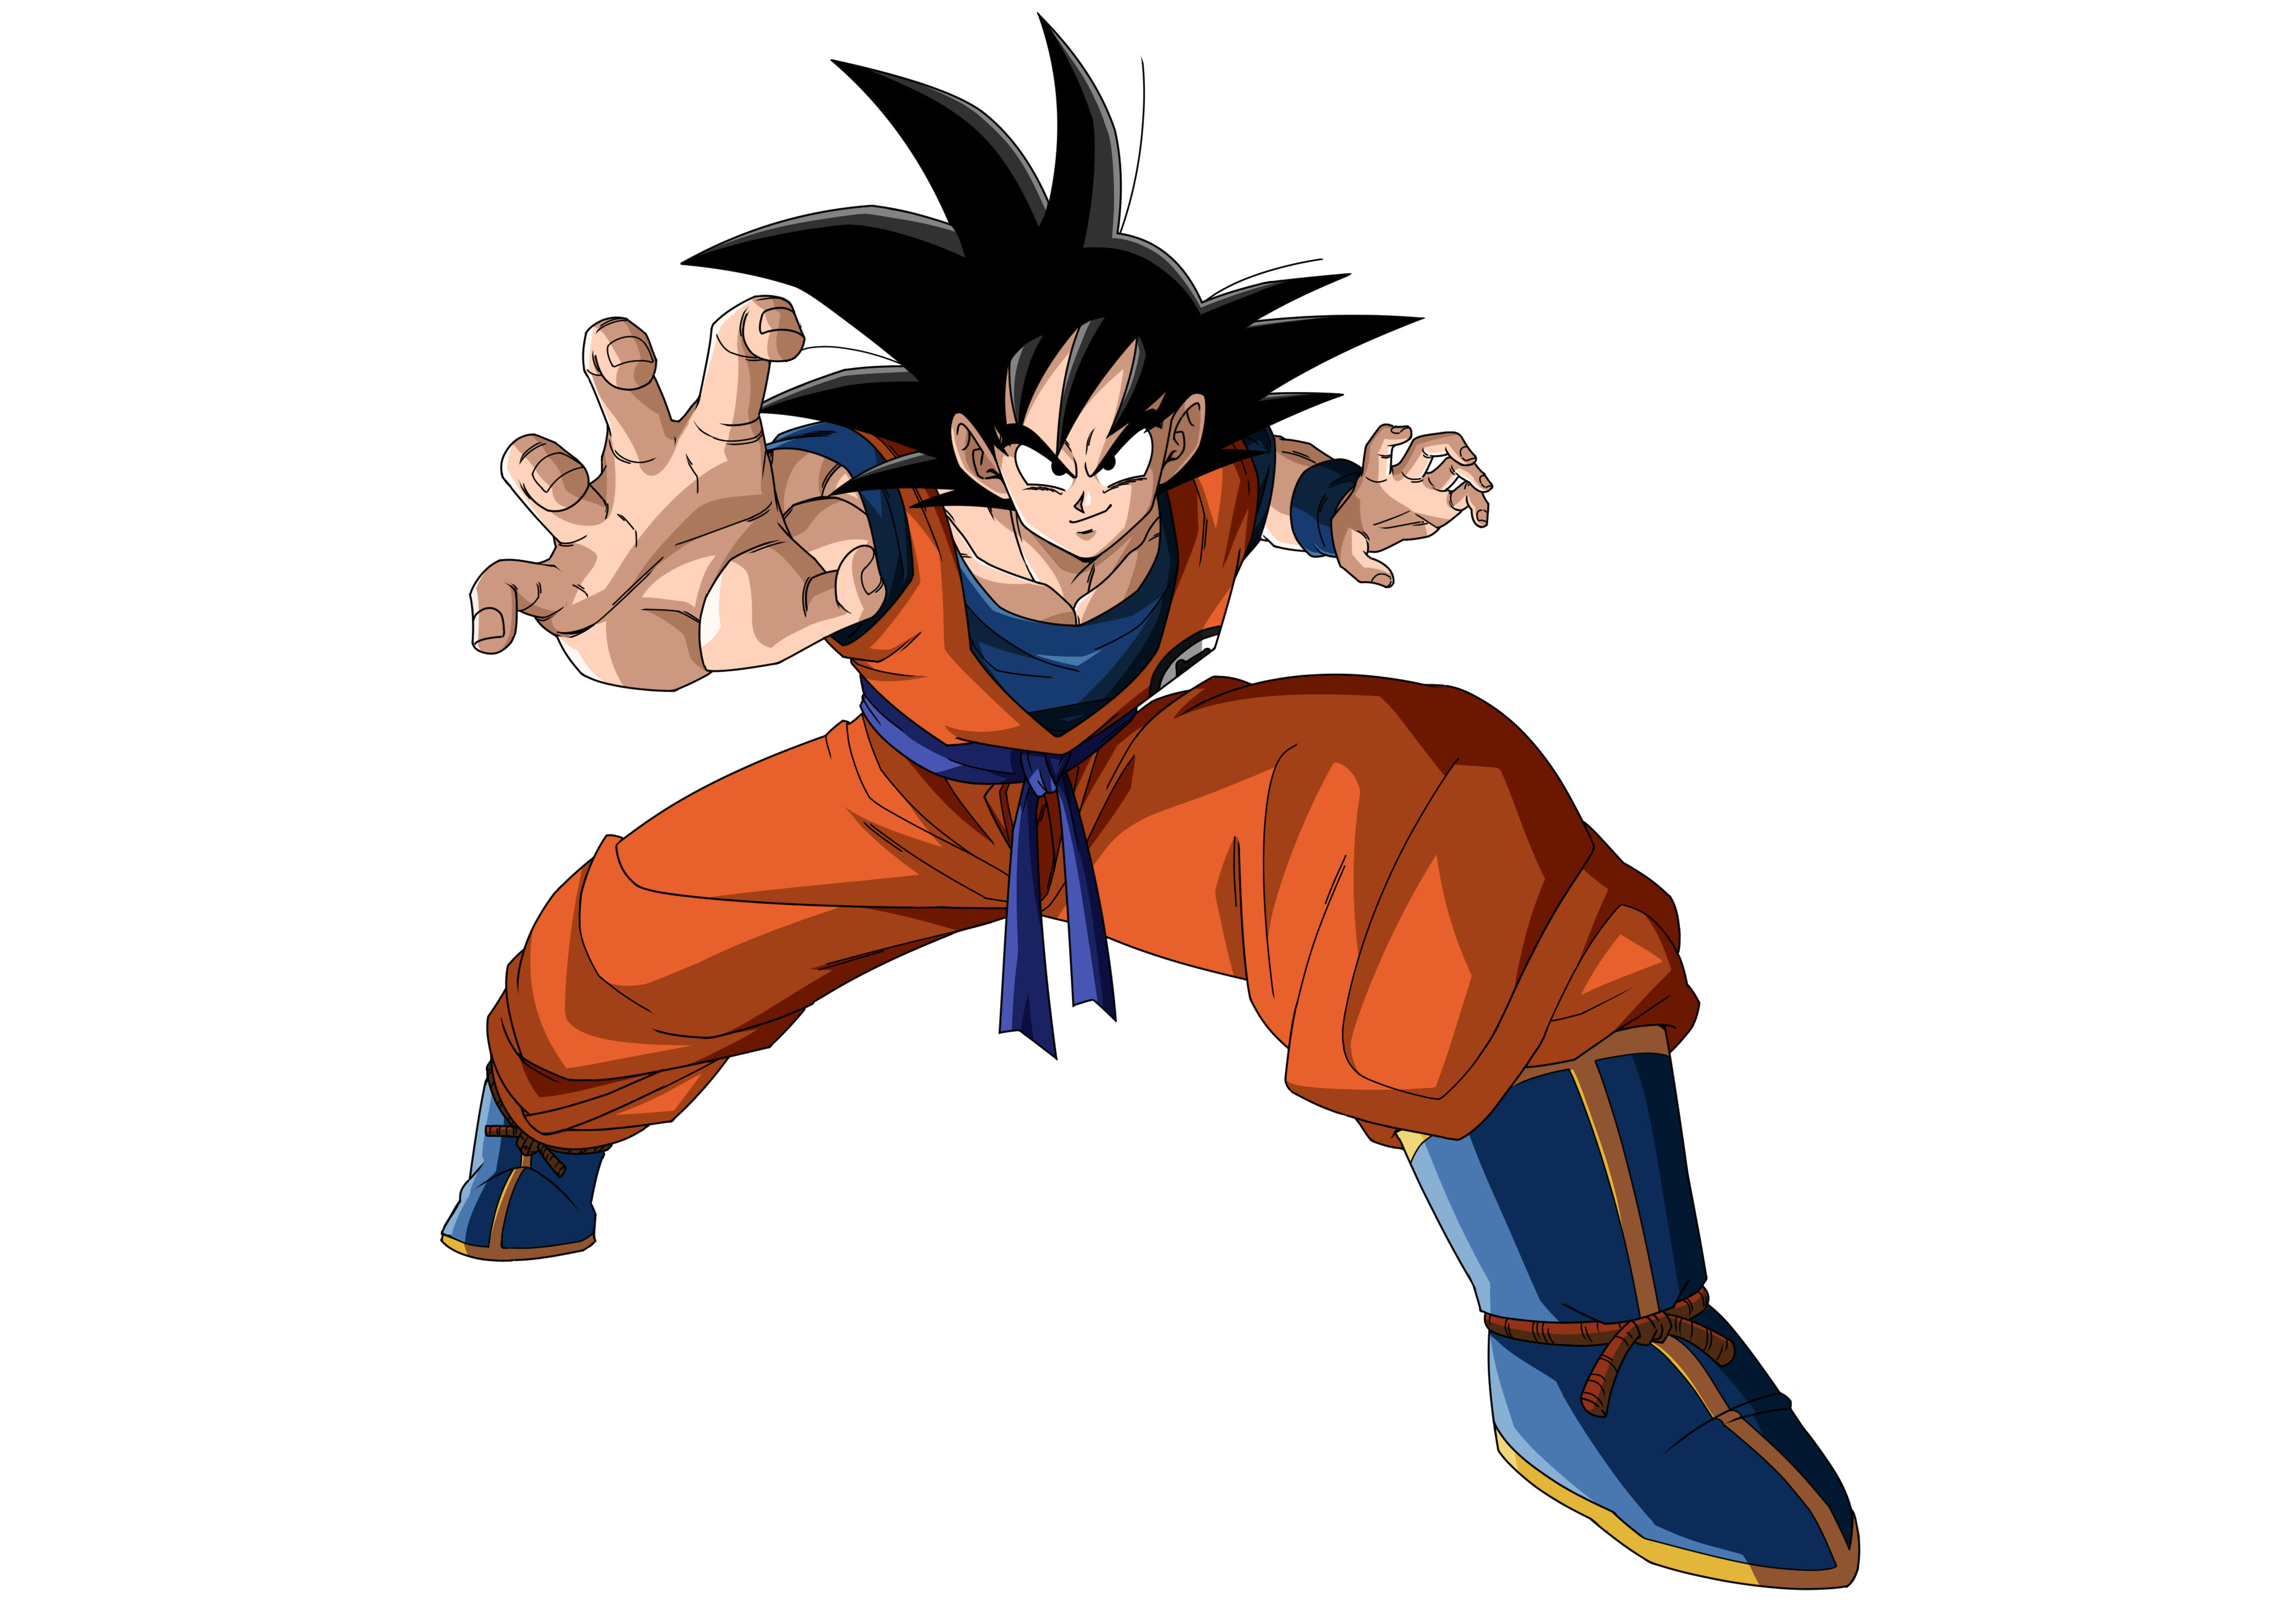 Custom I will draw or turn your photo into dragon ball z anime